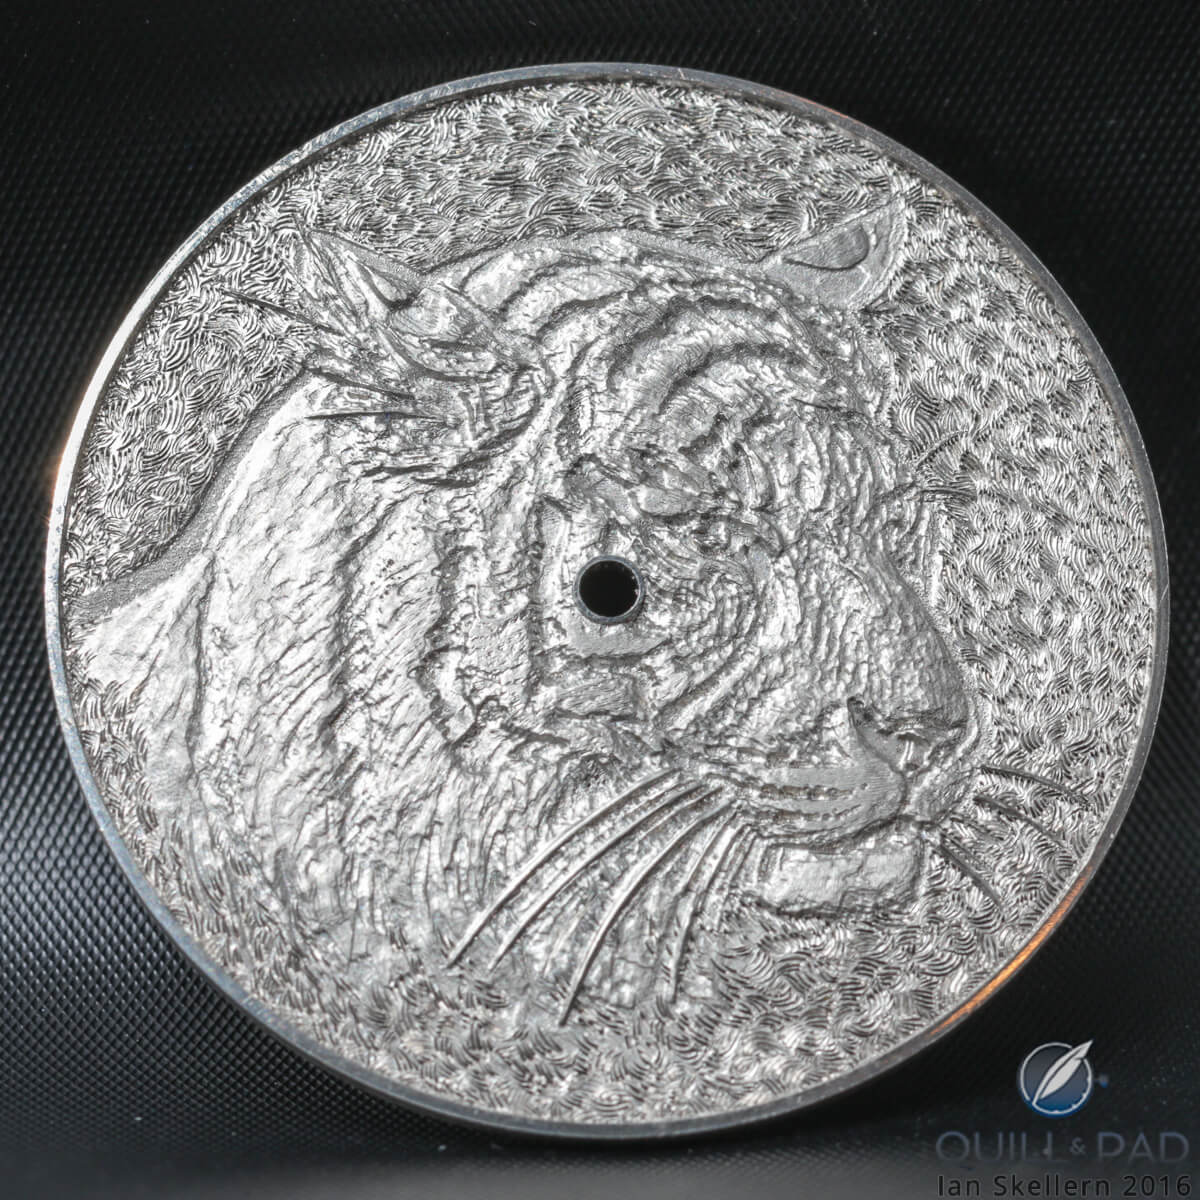 An engraved dial (before enameling) of the Hermès Arceau Tigre